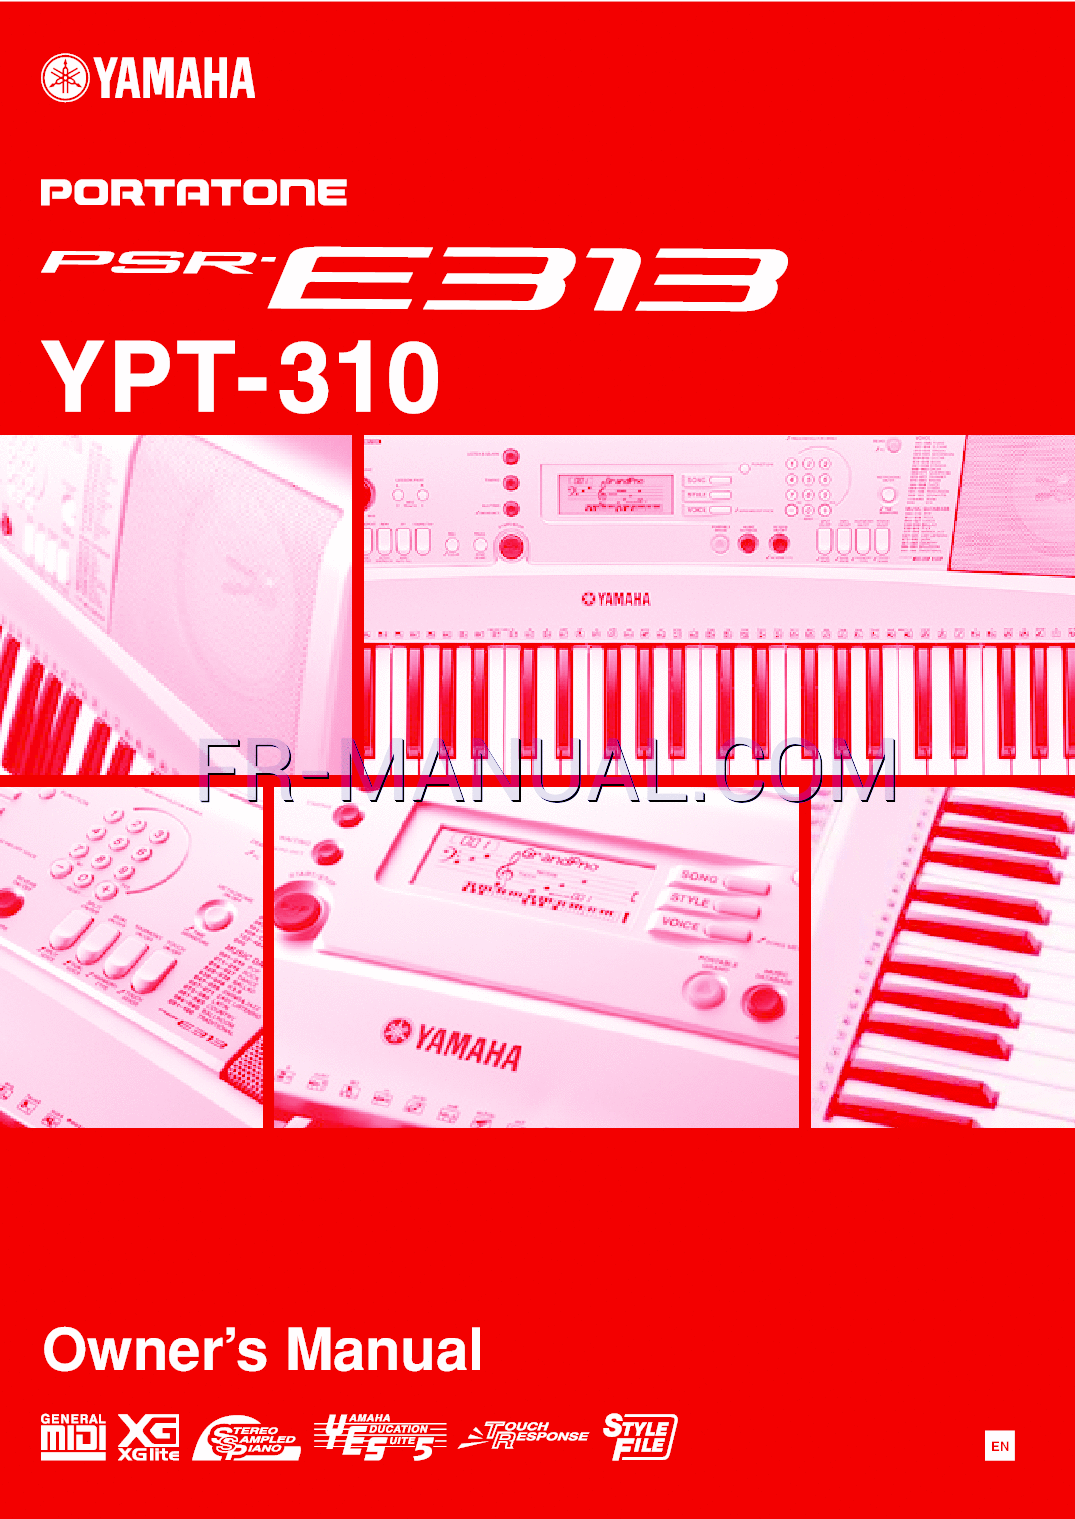 Read online User's Manual for Yamaha Electronic Keyboard PSR-E313/YPT-310 (Page 1)